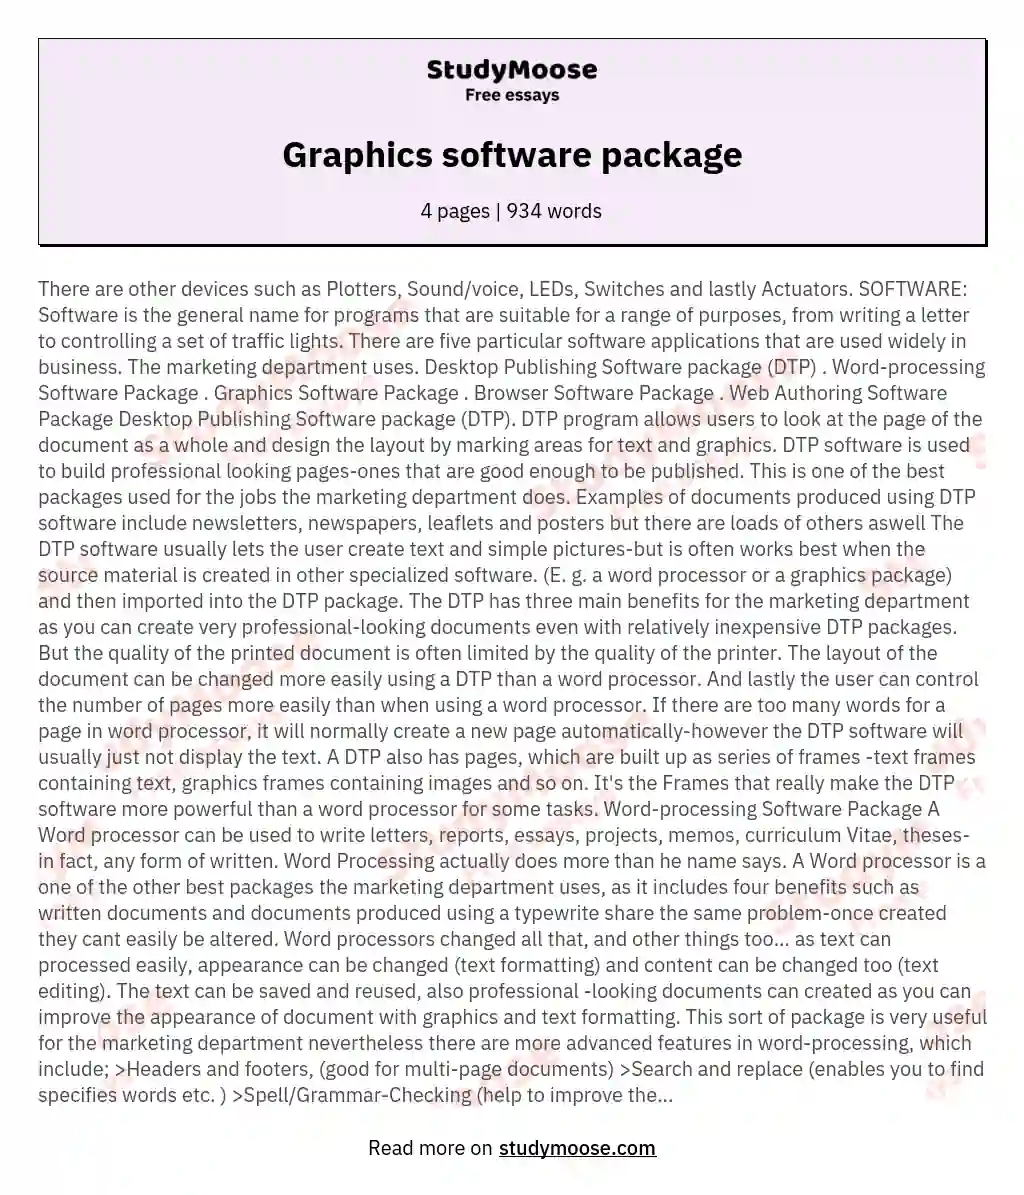 Graphics software package